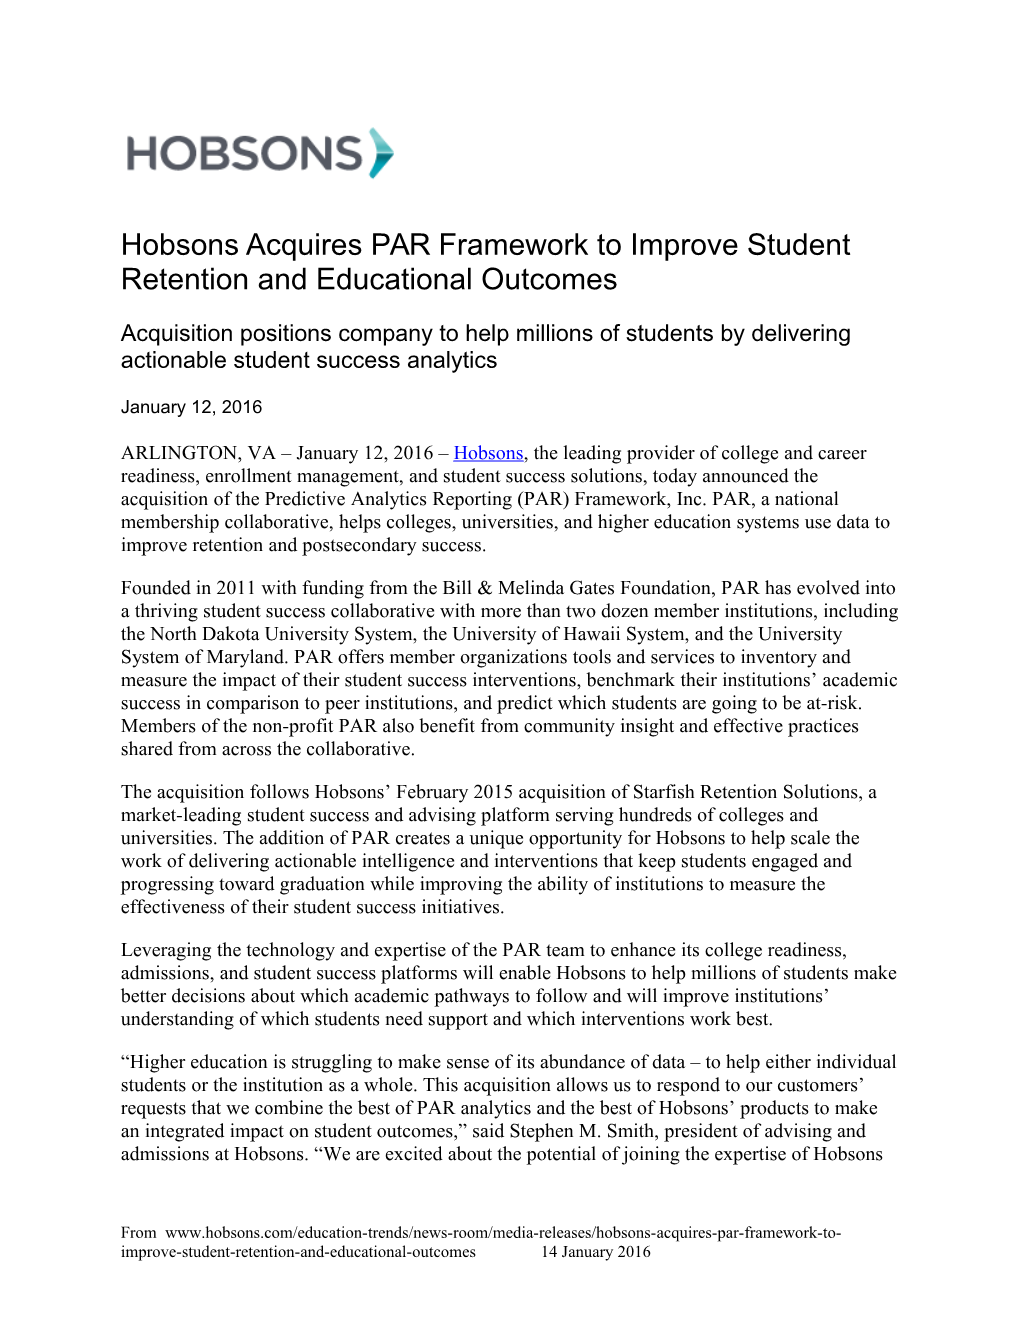 Hobsons Acquires PAR Framework to Improve Student Retention and Educational Outcomes